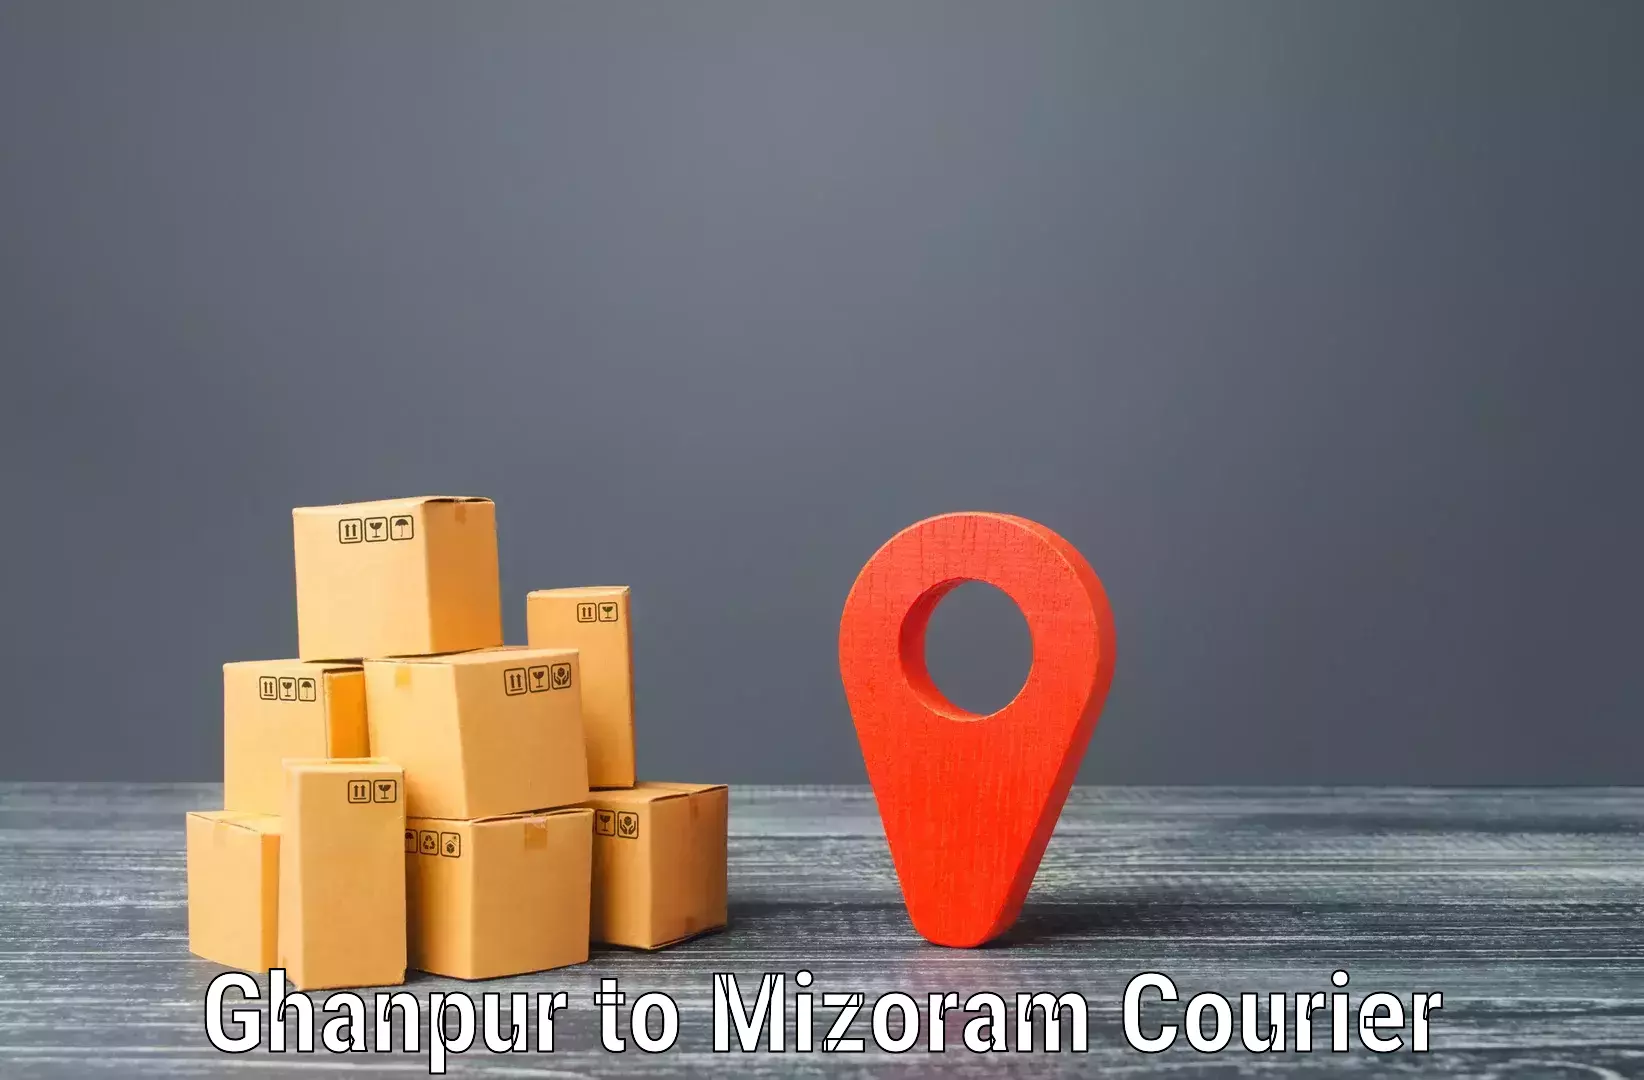 Customer-centric shipping Ghanpur to Champhai